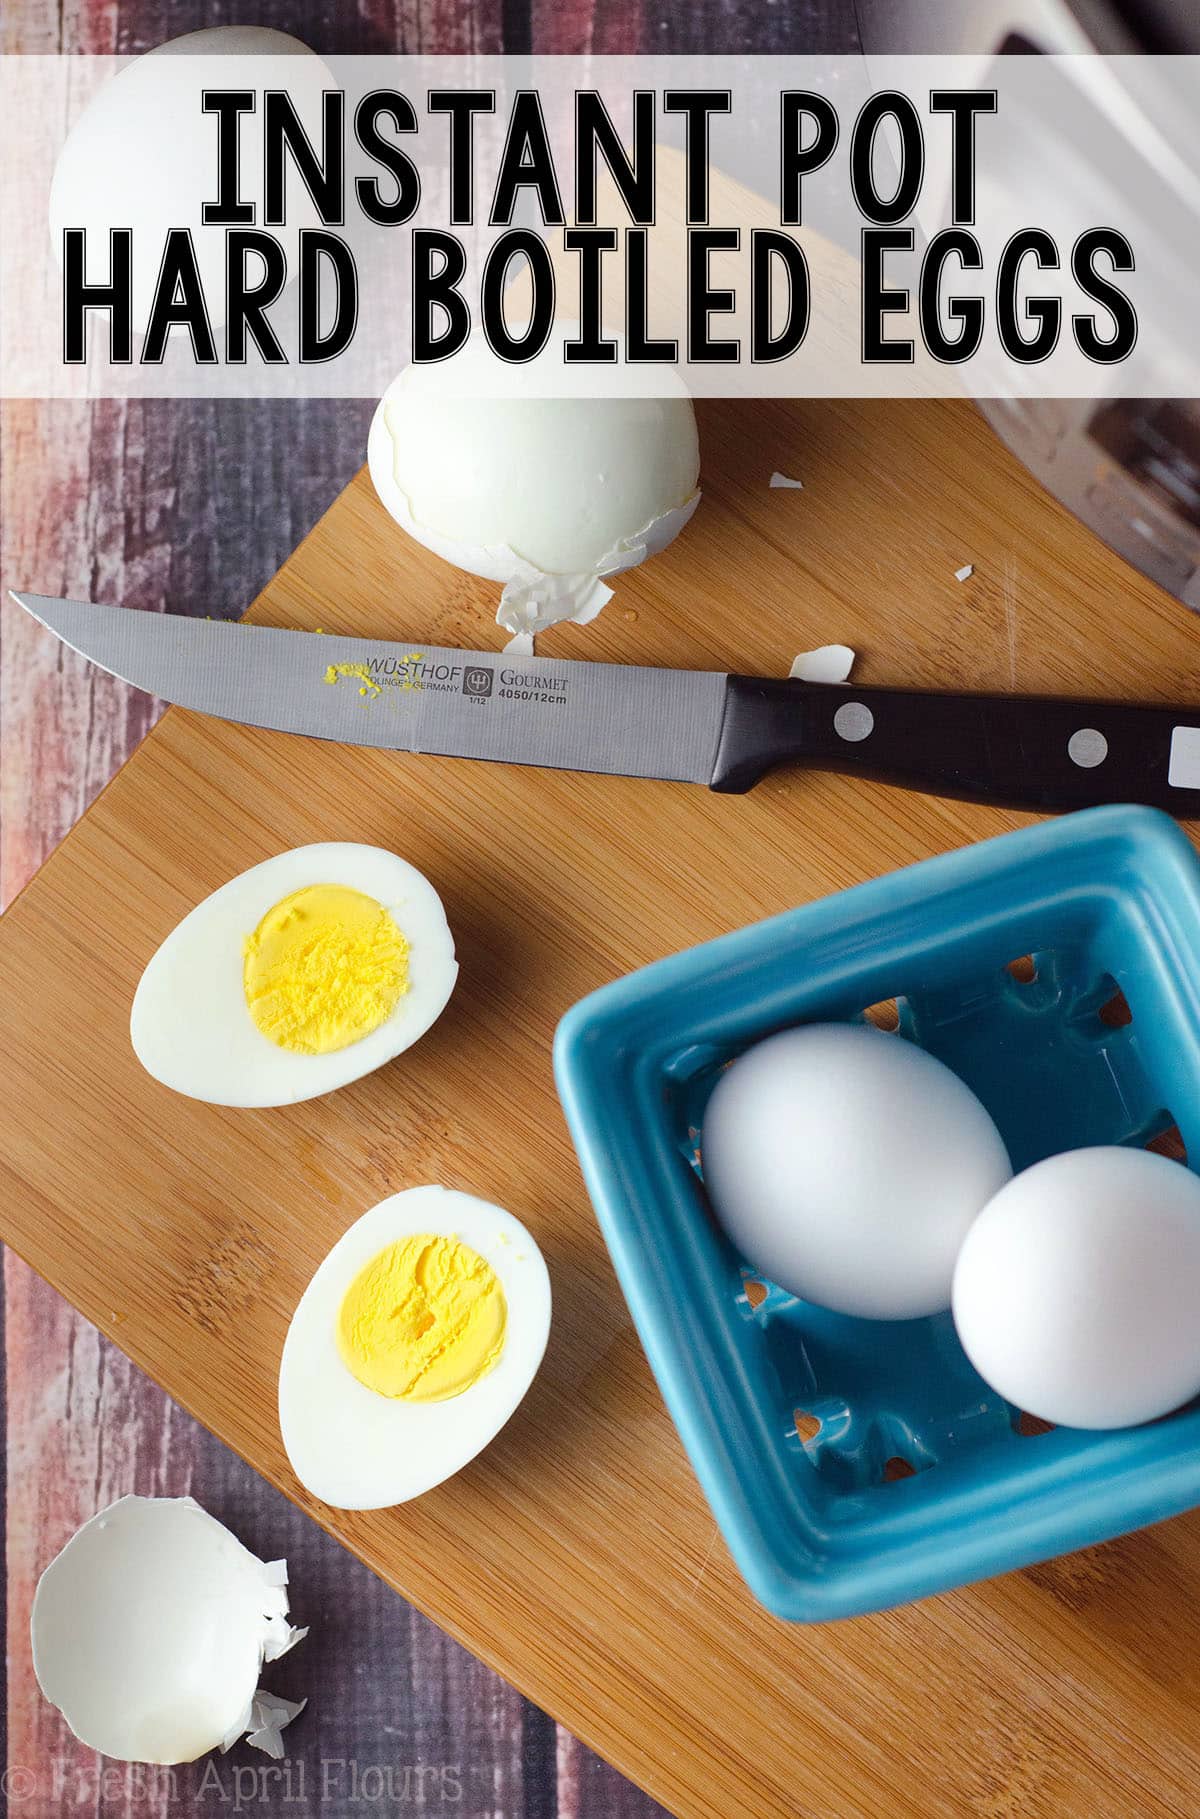 Make fool-proof hard boiled eggs in the Instant Pot with the 7-7-7 method. Easy to peel with the perfect texture every time! via @frshaprilflours